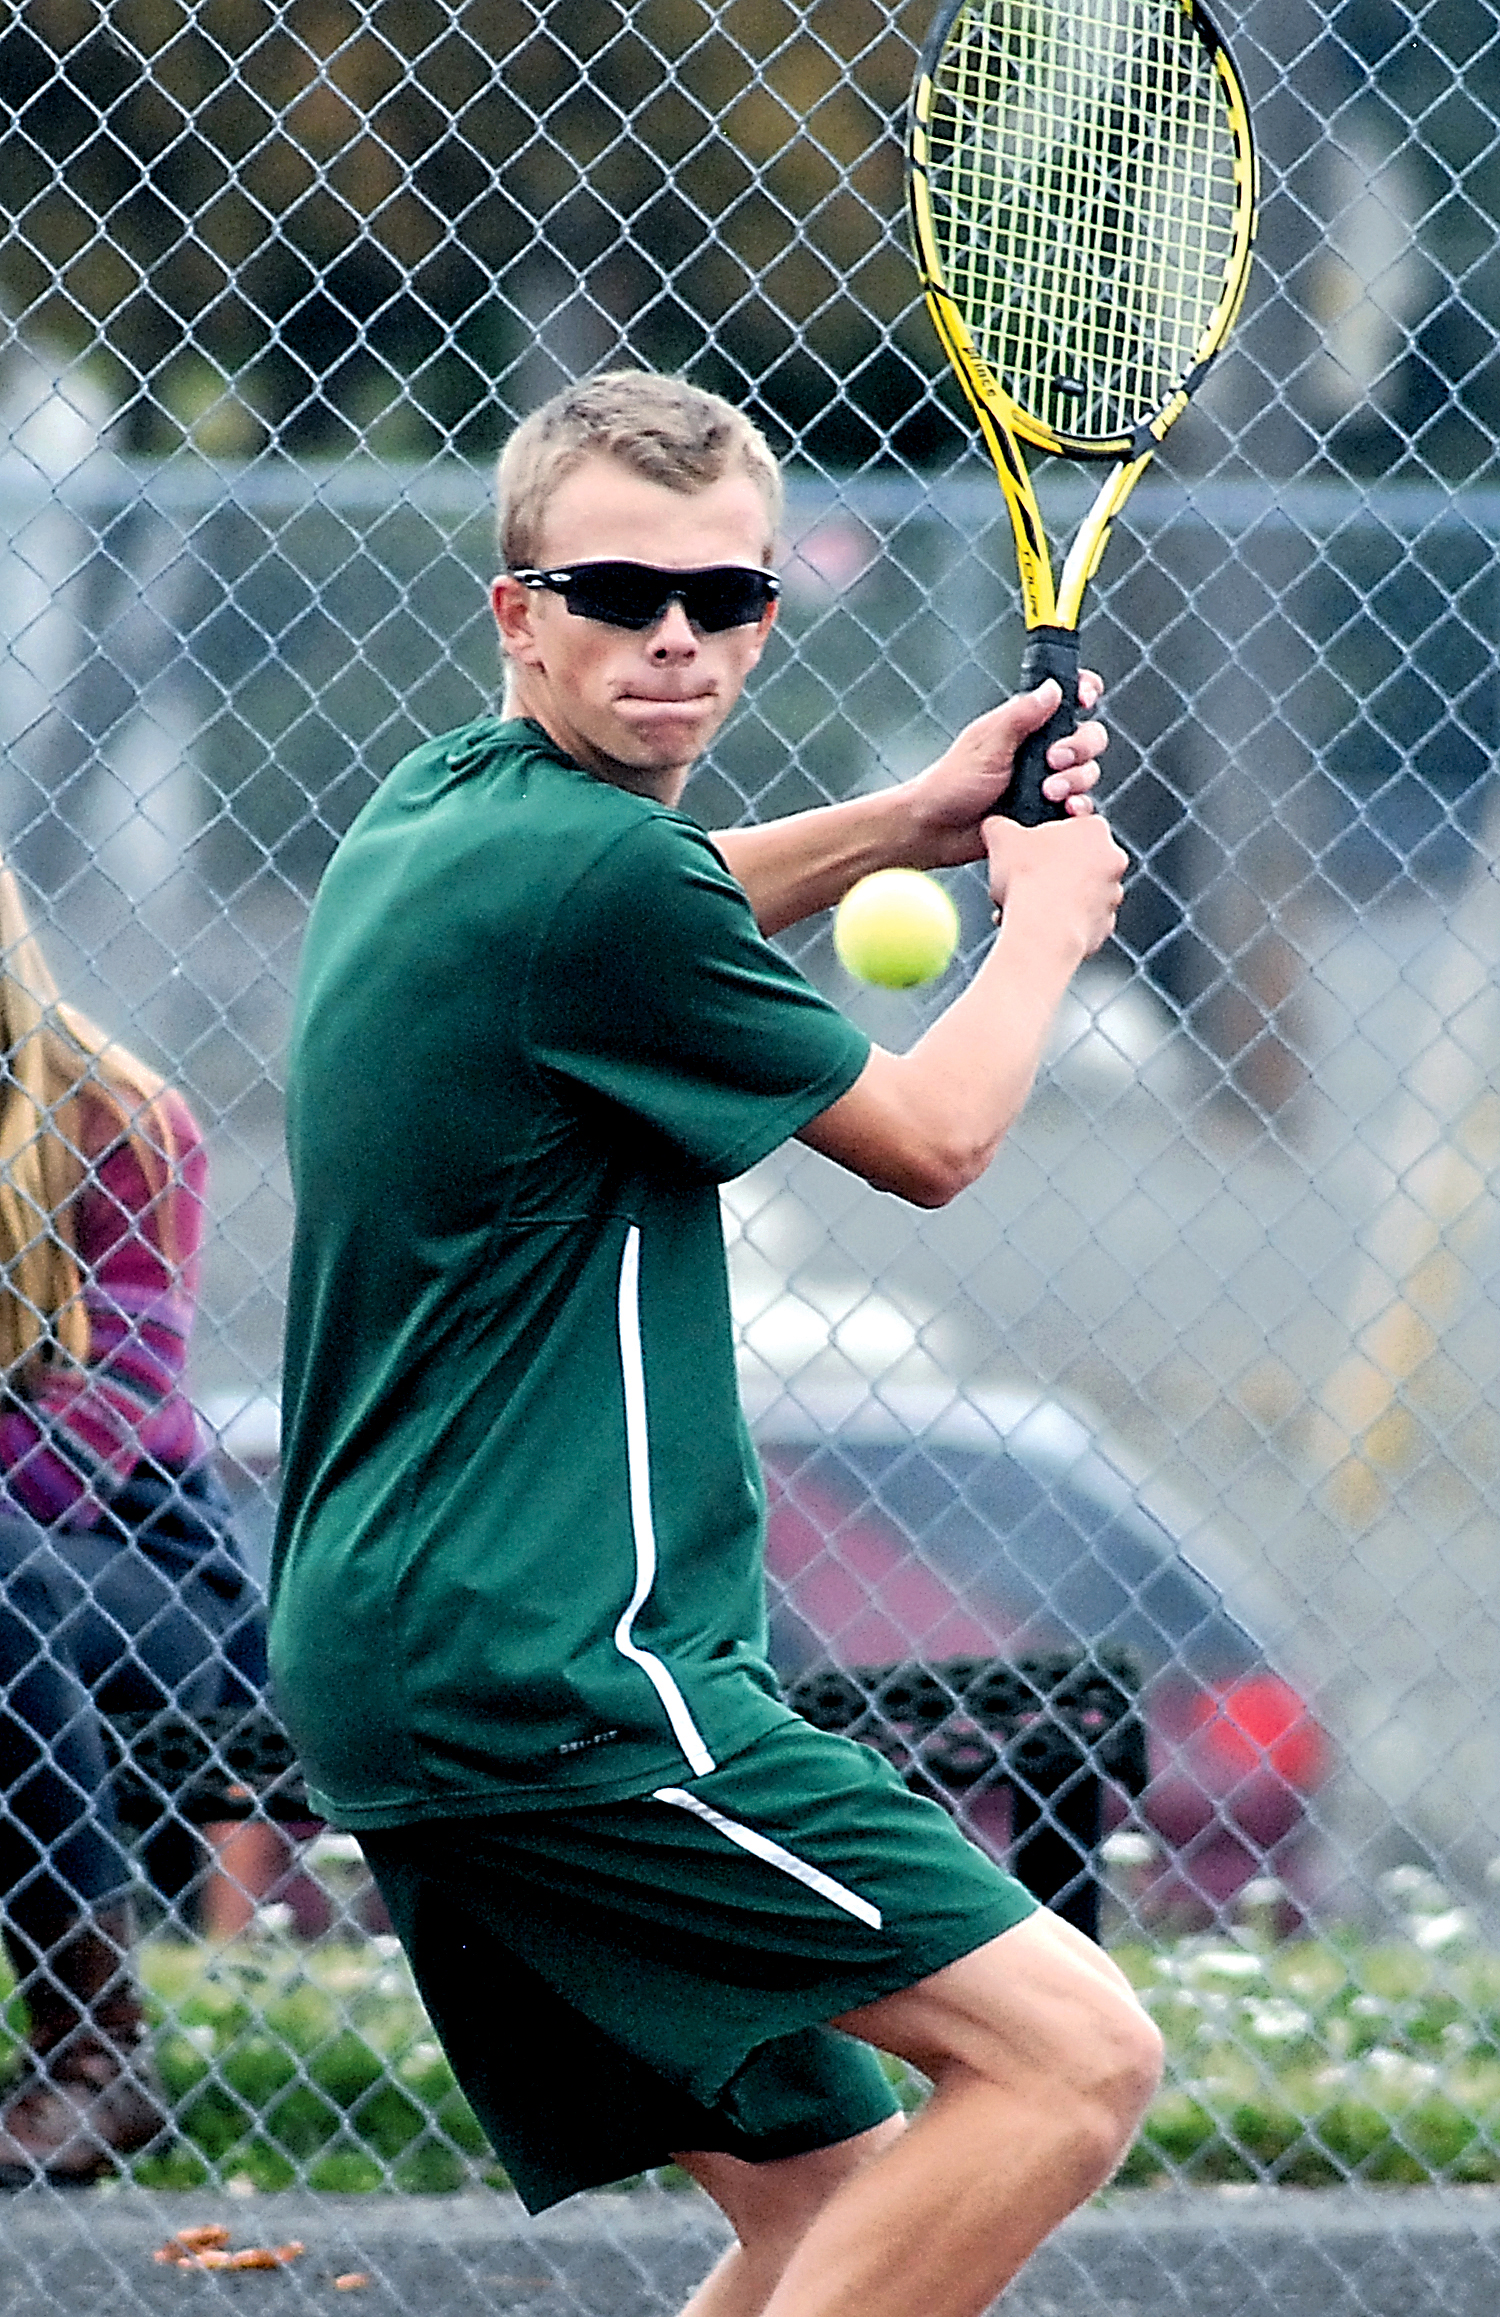 Port Angeles' Janson Pederson hits to Klahowya's Taylor Fite in singles play. Keith Thorpe/Peninsula Daily News